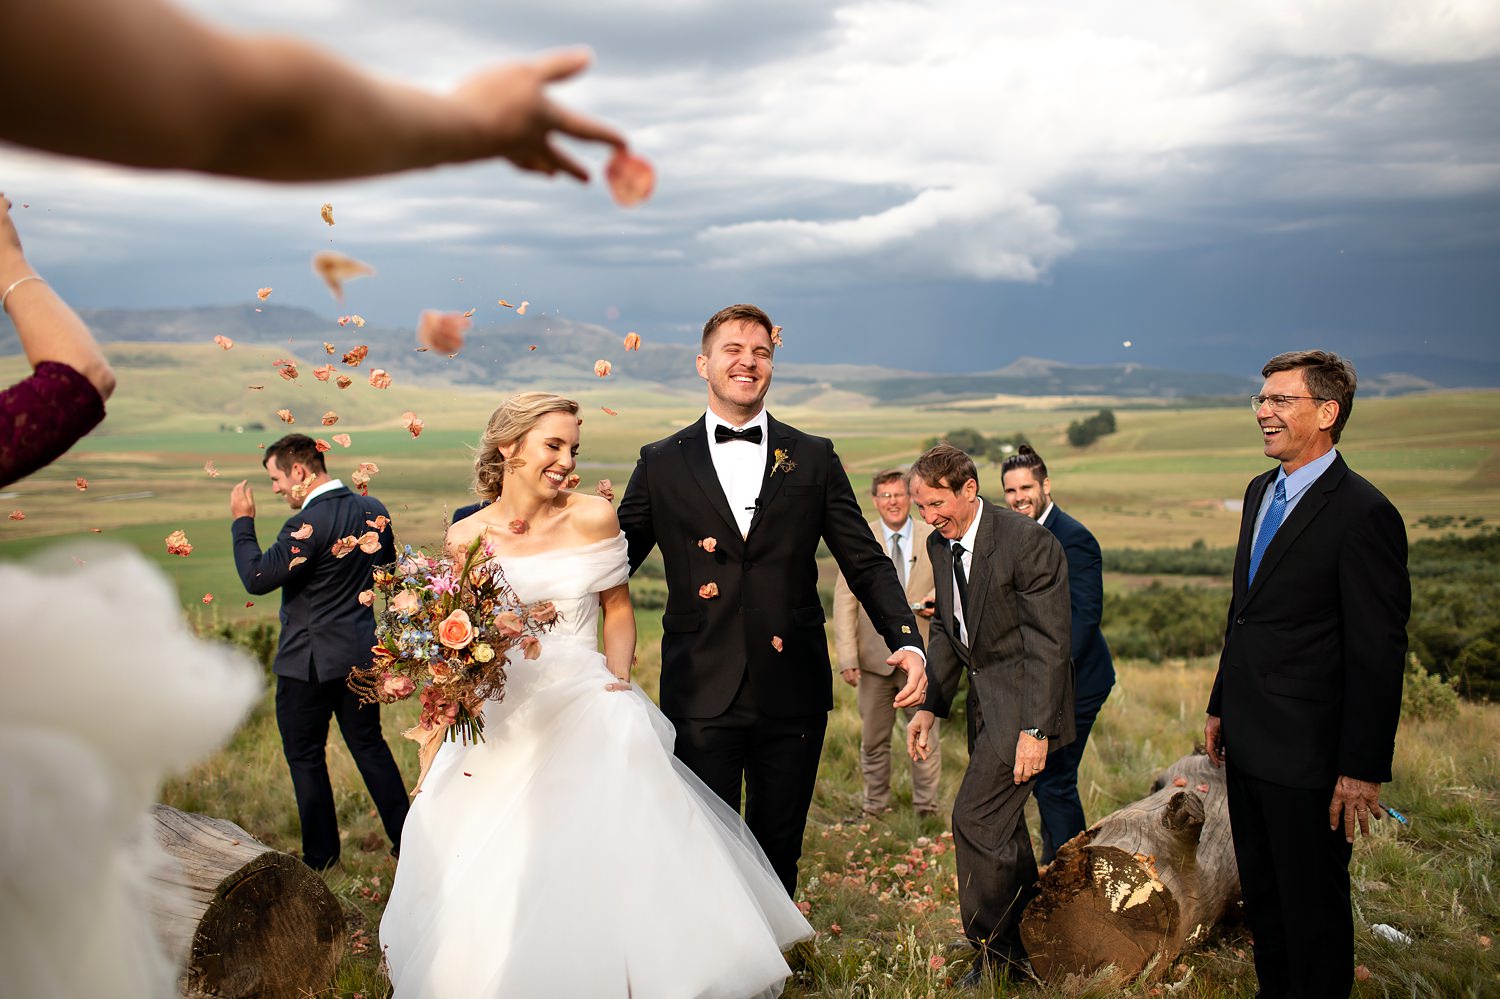 Guests toss dry bougainvillea and hydrangea flowers as confetti at the end of a Drakensberg wedding ceremony, with the mountains behind the couple.